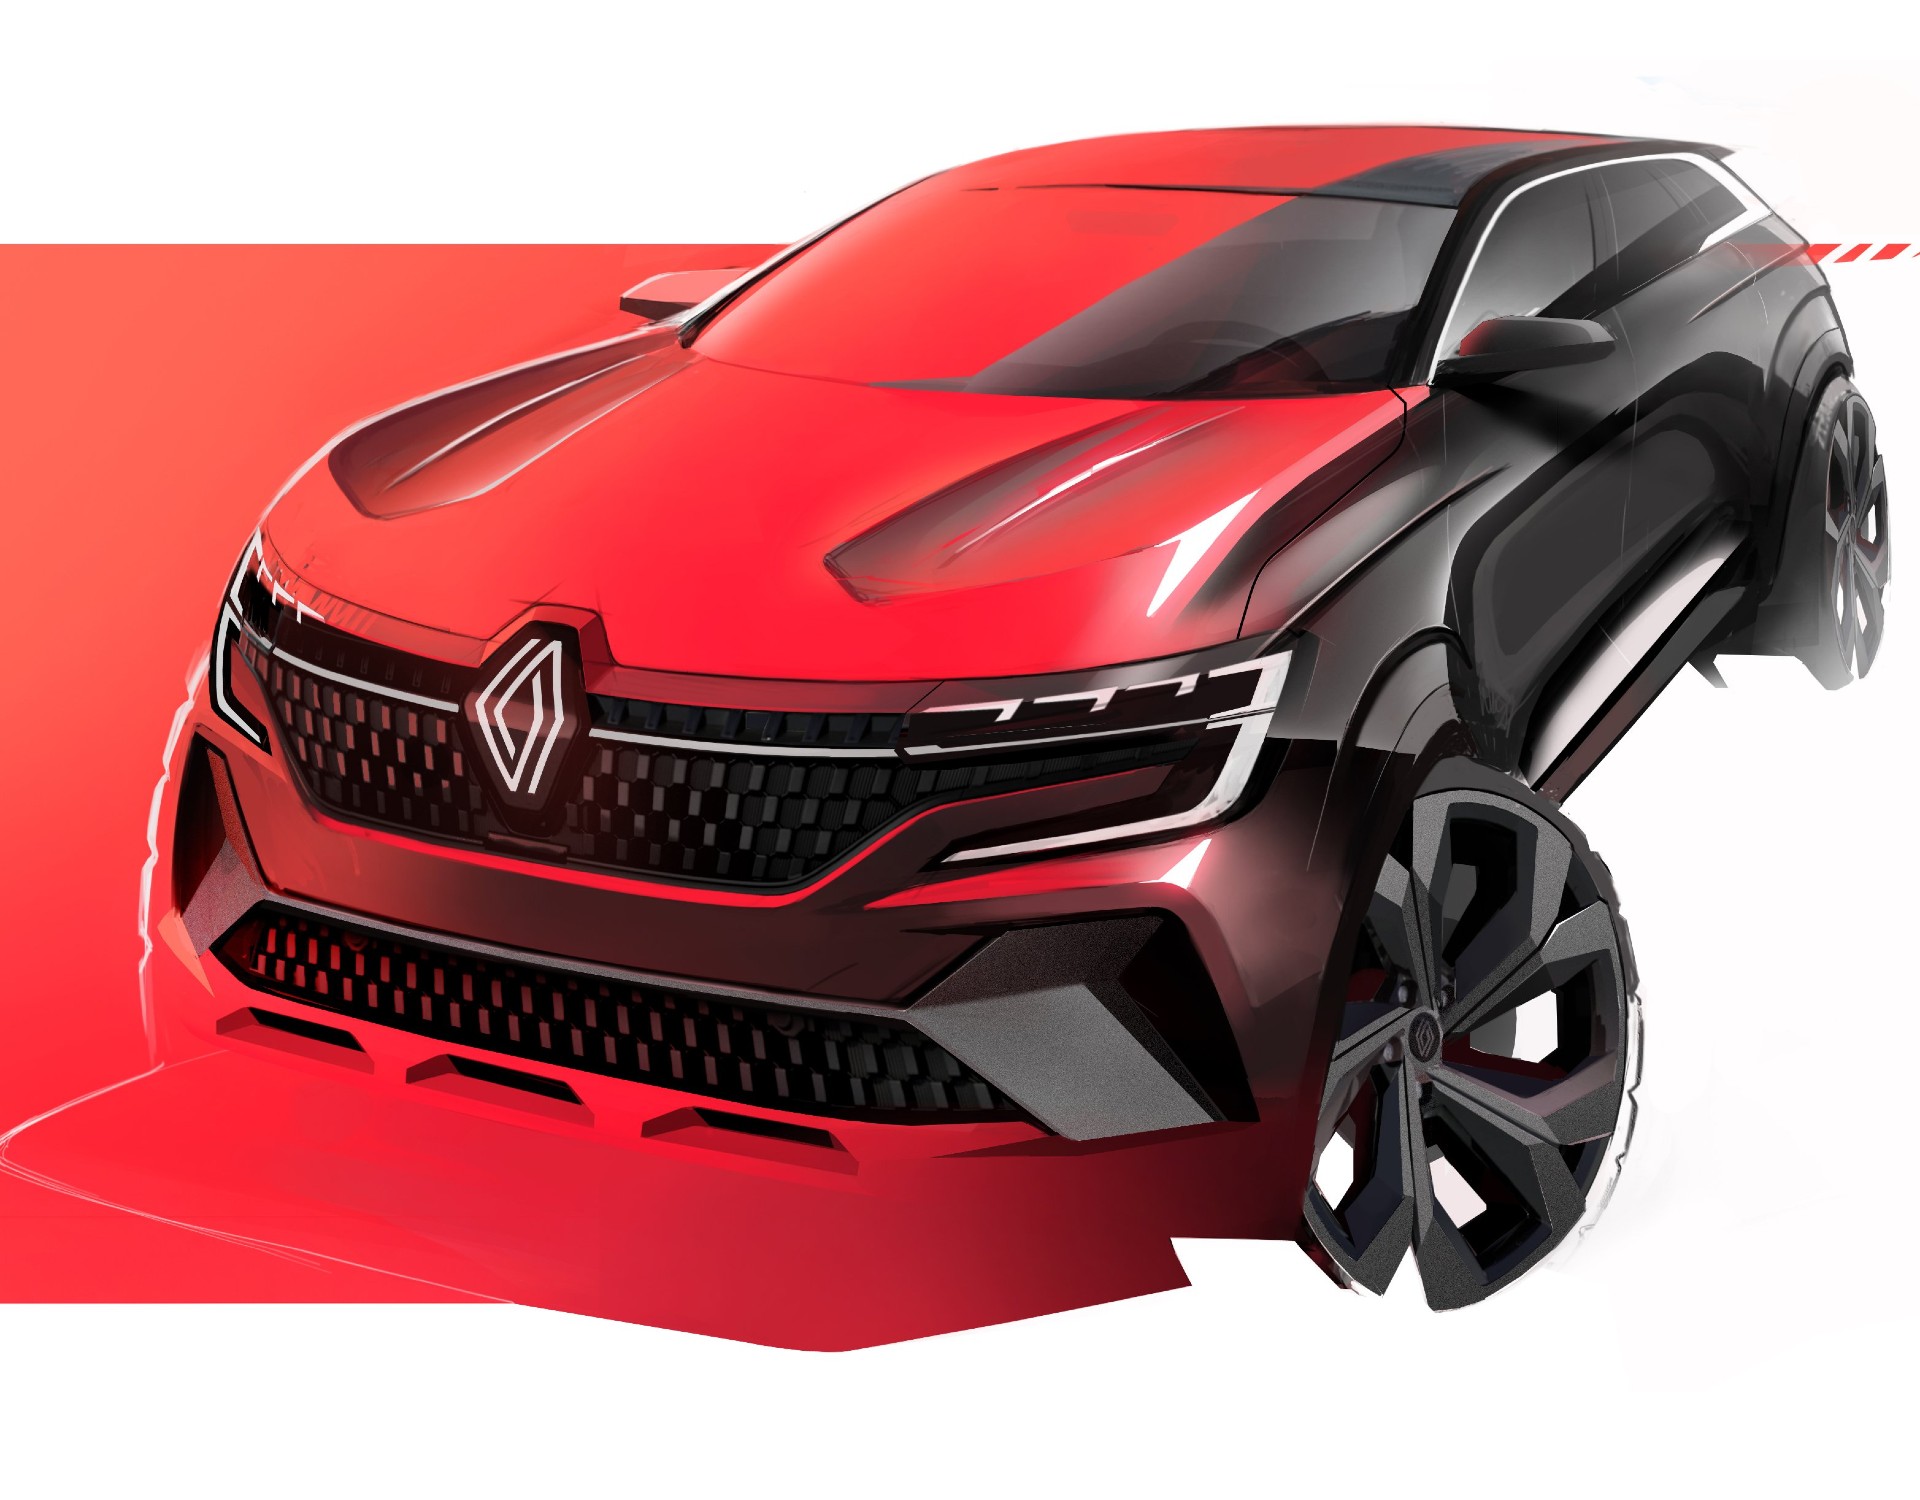 2022 Renault Austral Sketches Released